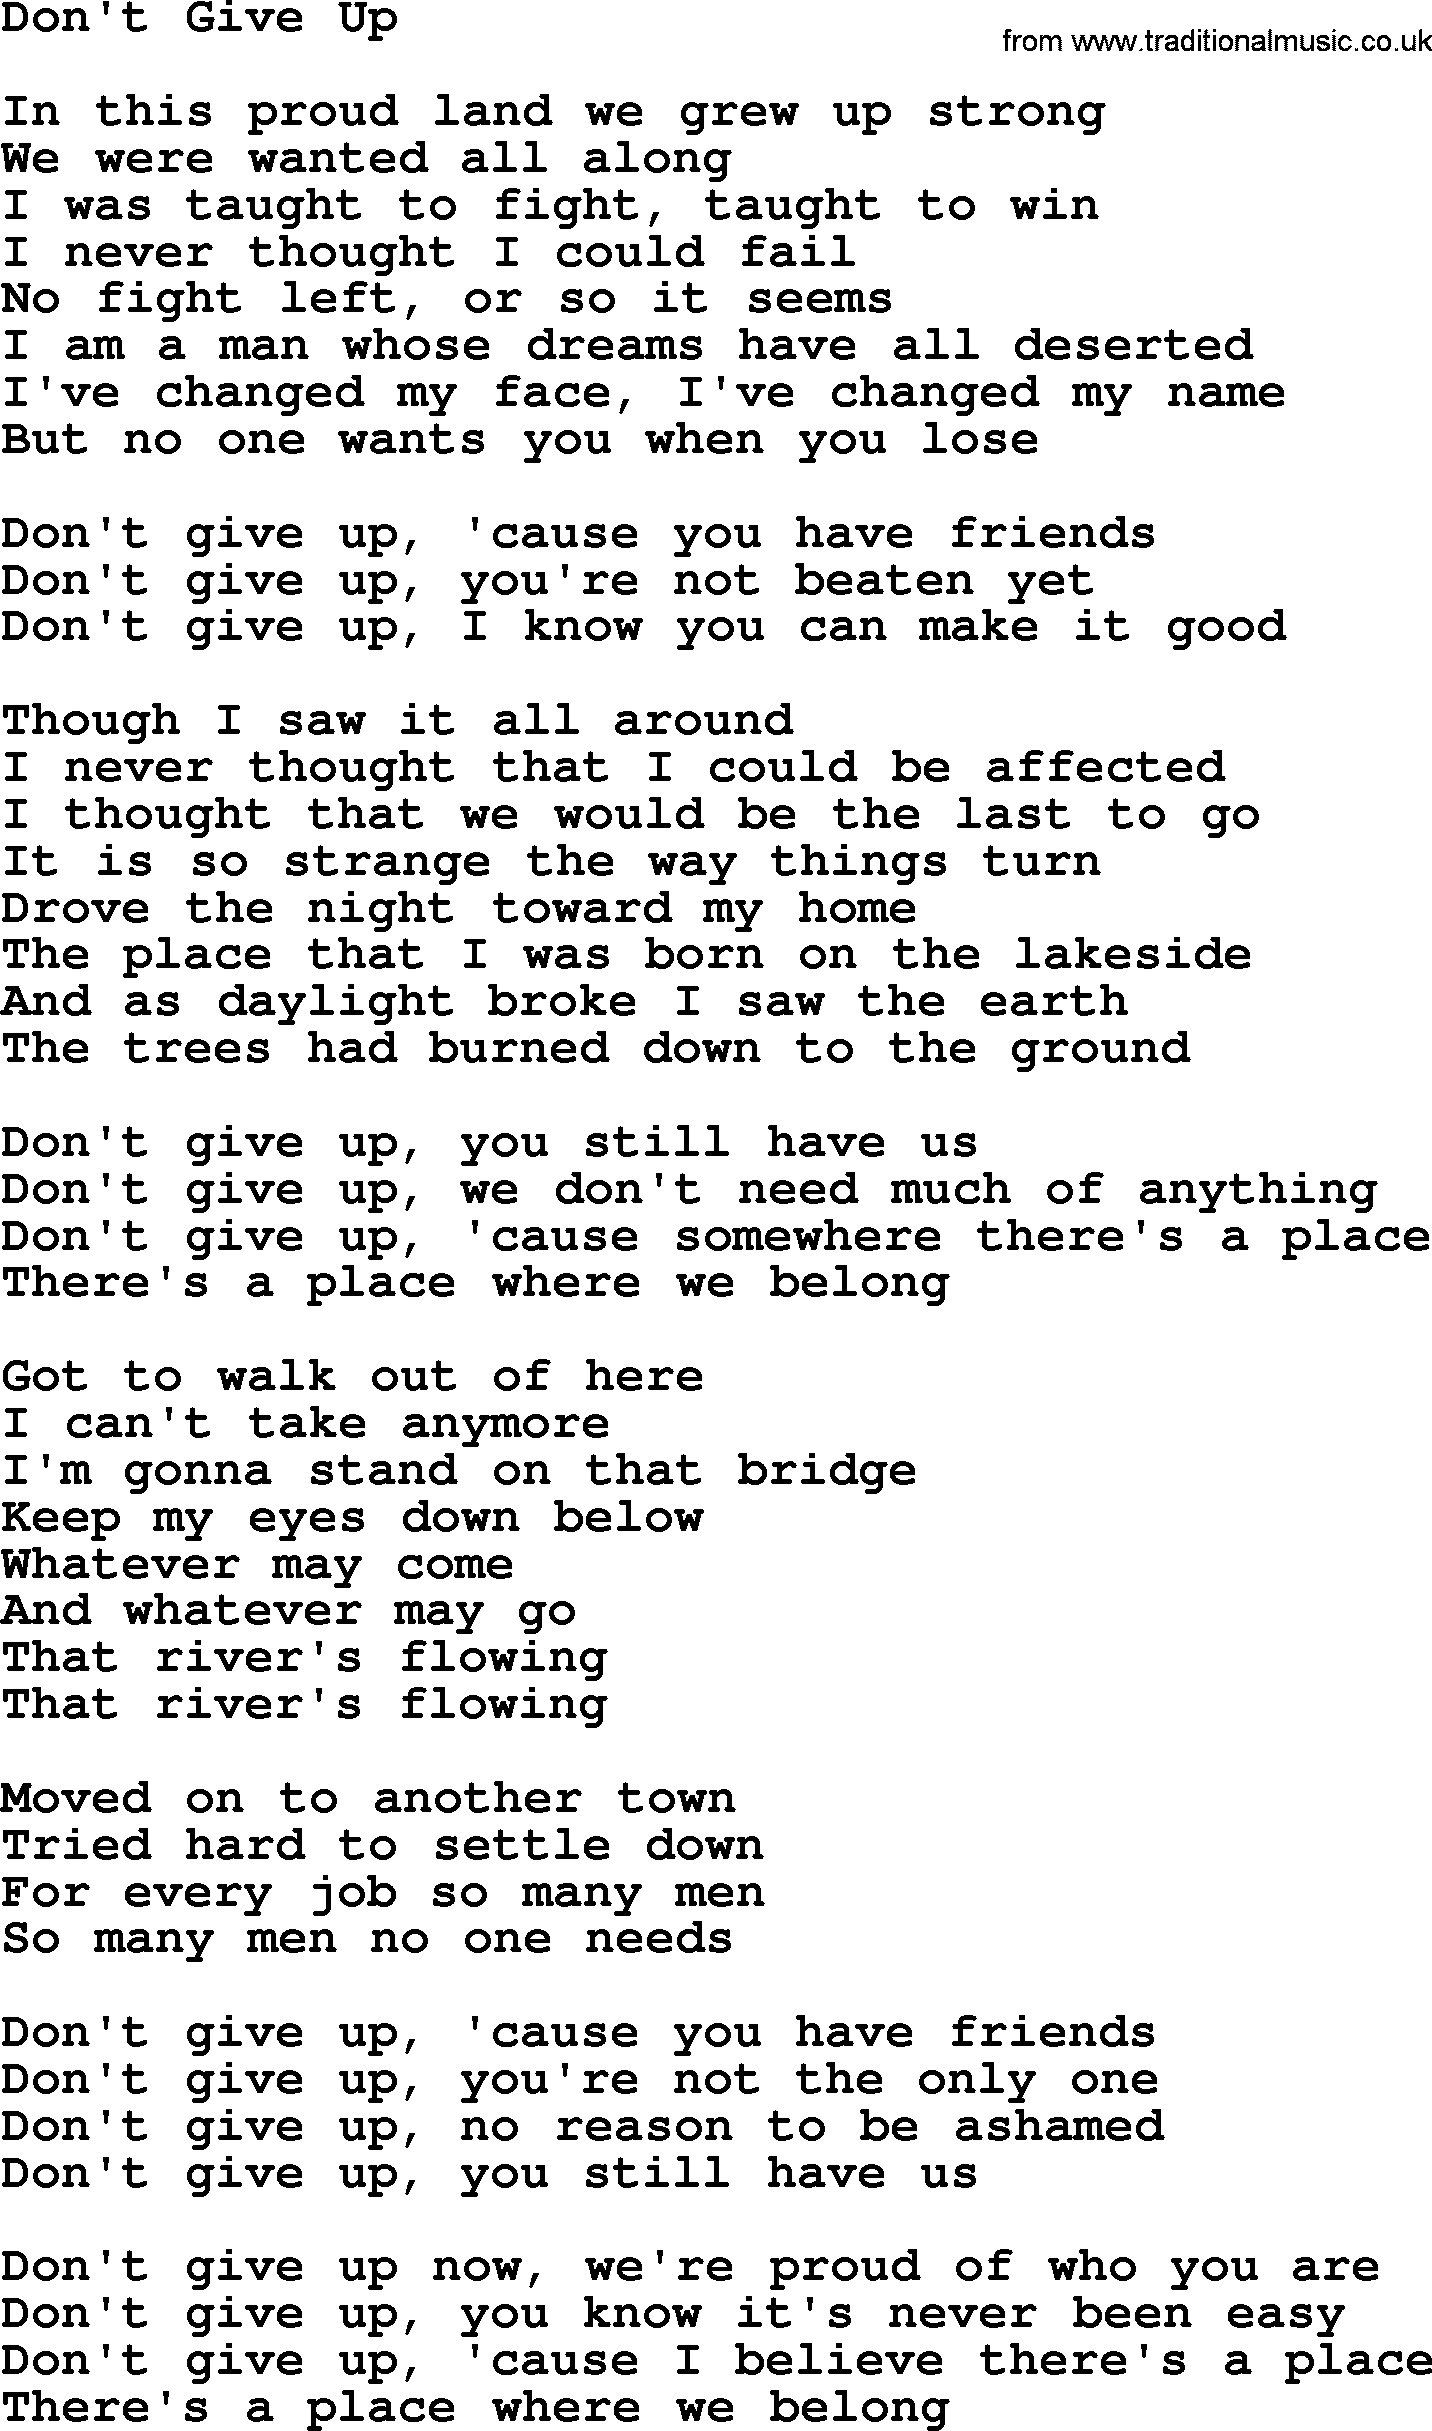 Willie Nelson song: Don't Give Up lyrics